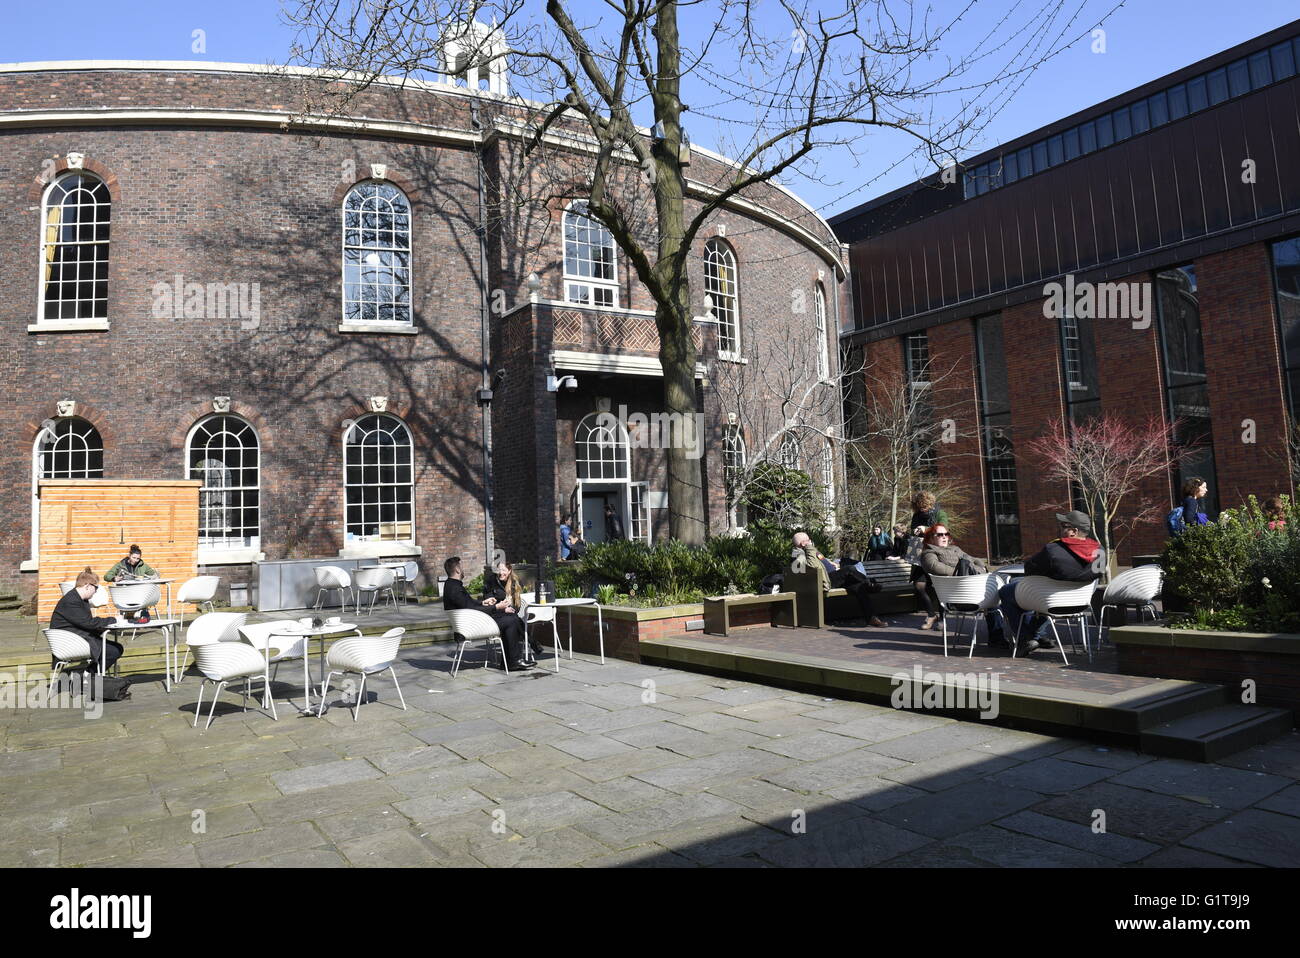 Garden and seating area at the Bluecoat Arts Centre, Bluecoat Chambers, School Lane, Liverpool L1 3BX Stock Photo